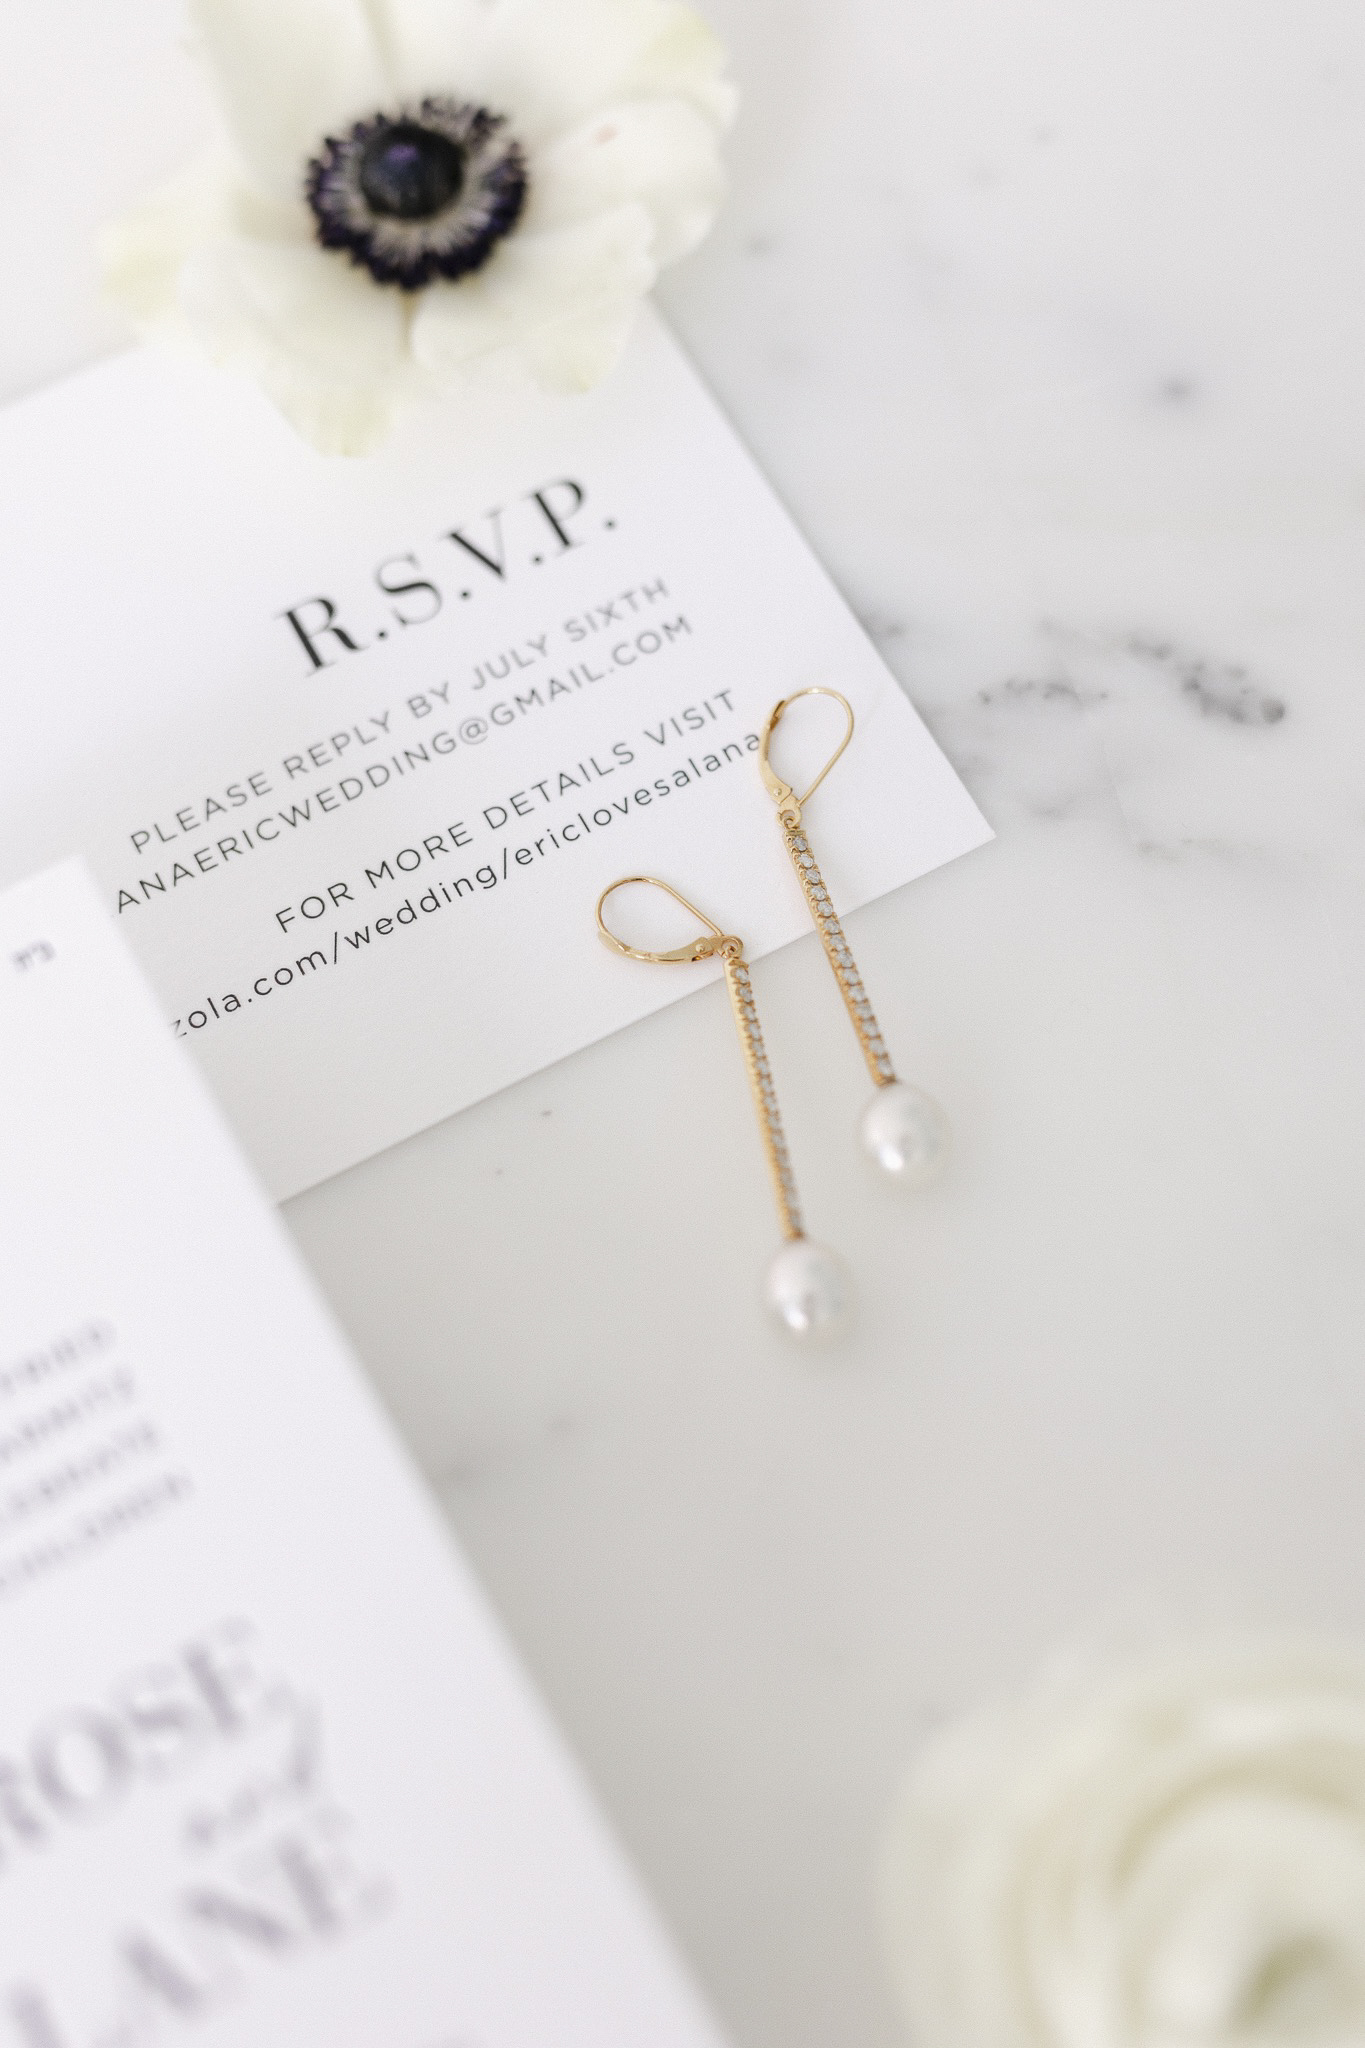 A pair of earrings on a white R.S.V.P card.